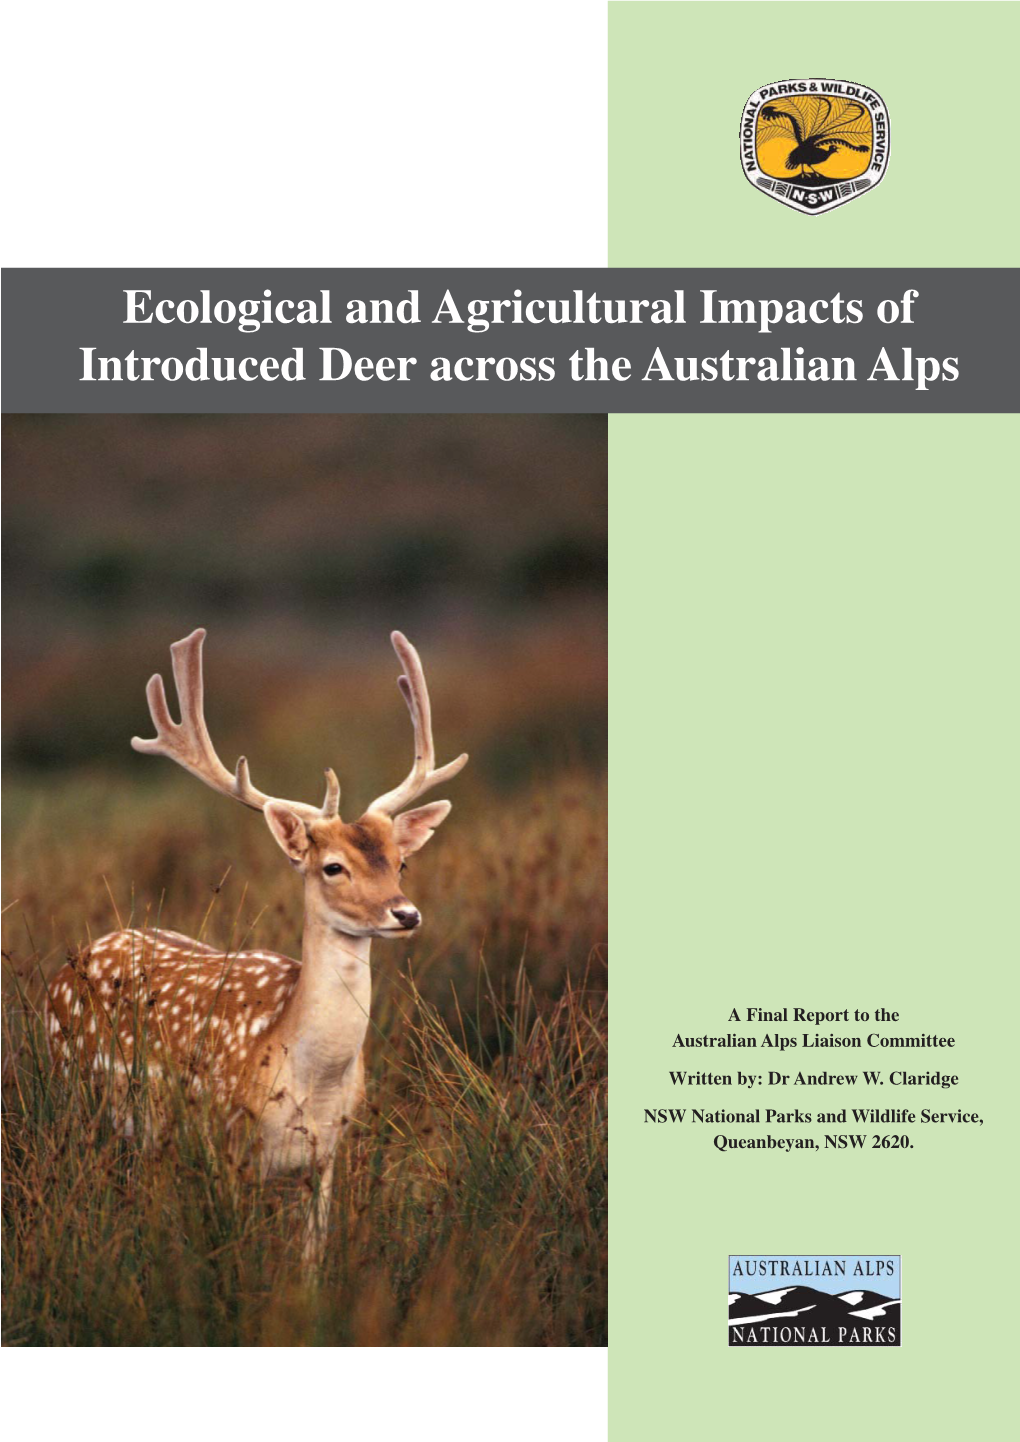 Ecological and Agricultural Impacts of Introduced Deer Across the Australian Alps